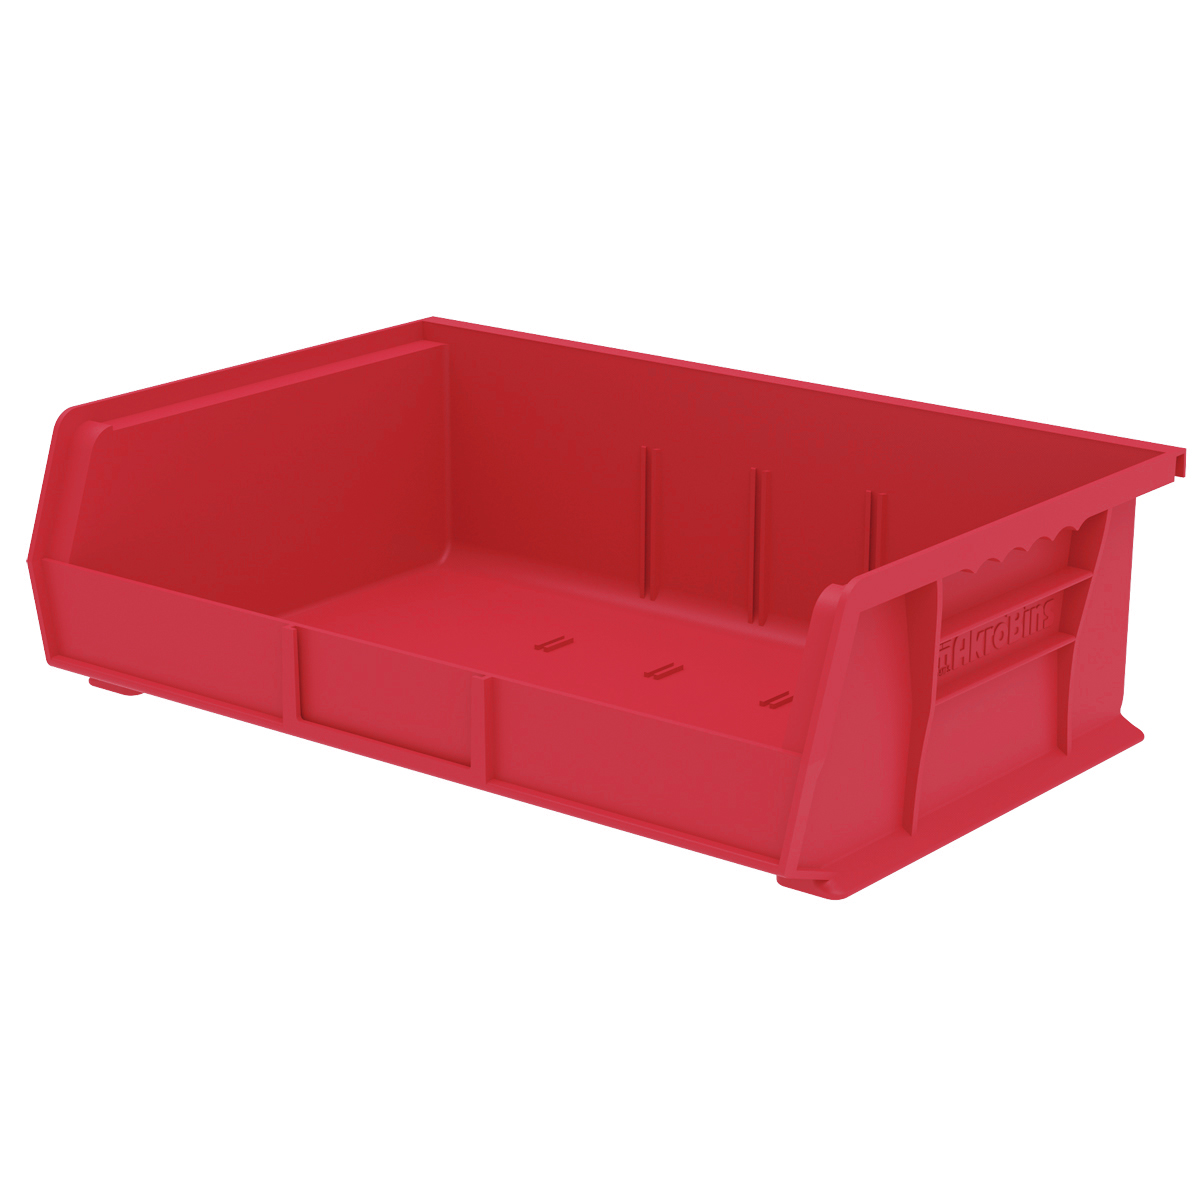 Akro-mils Hang and Stack Bin Red  Industrial Grade Polymer 30255RED - image 1 of 6